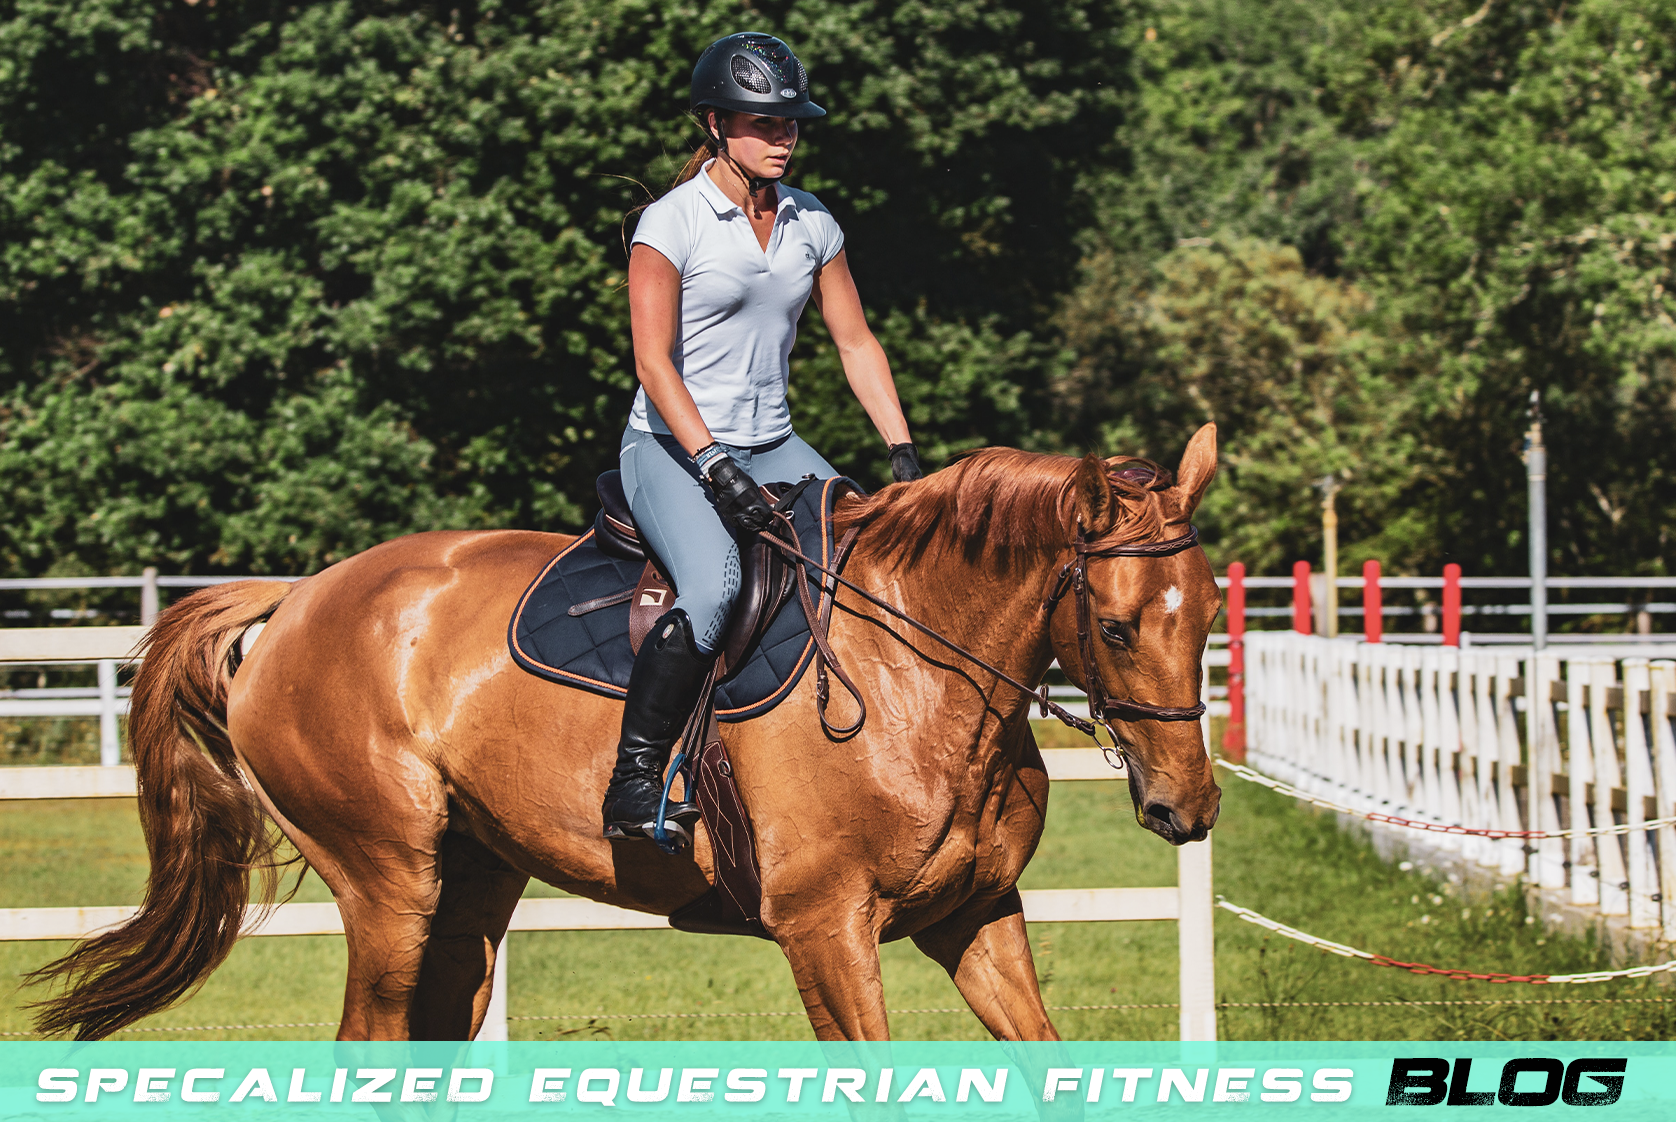 Fit To Ride: Physical Fitness for Equestrian Athletes